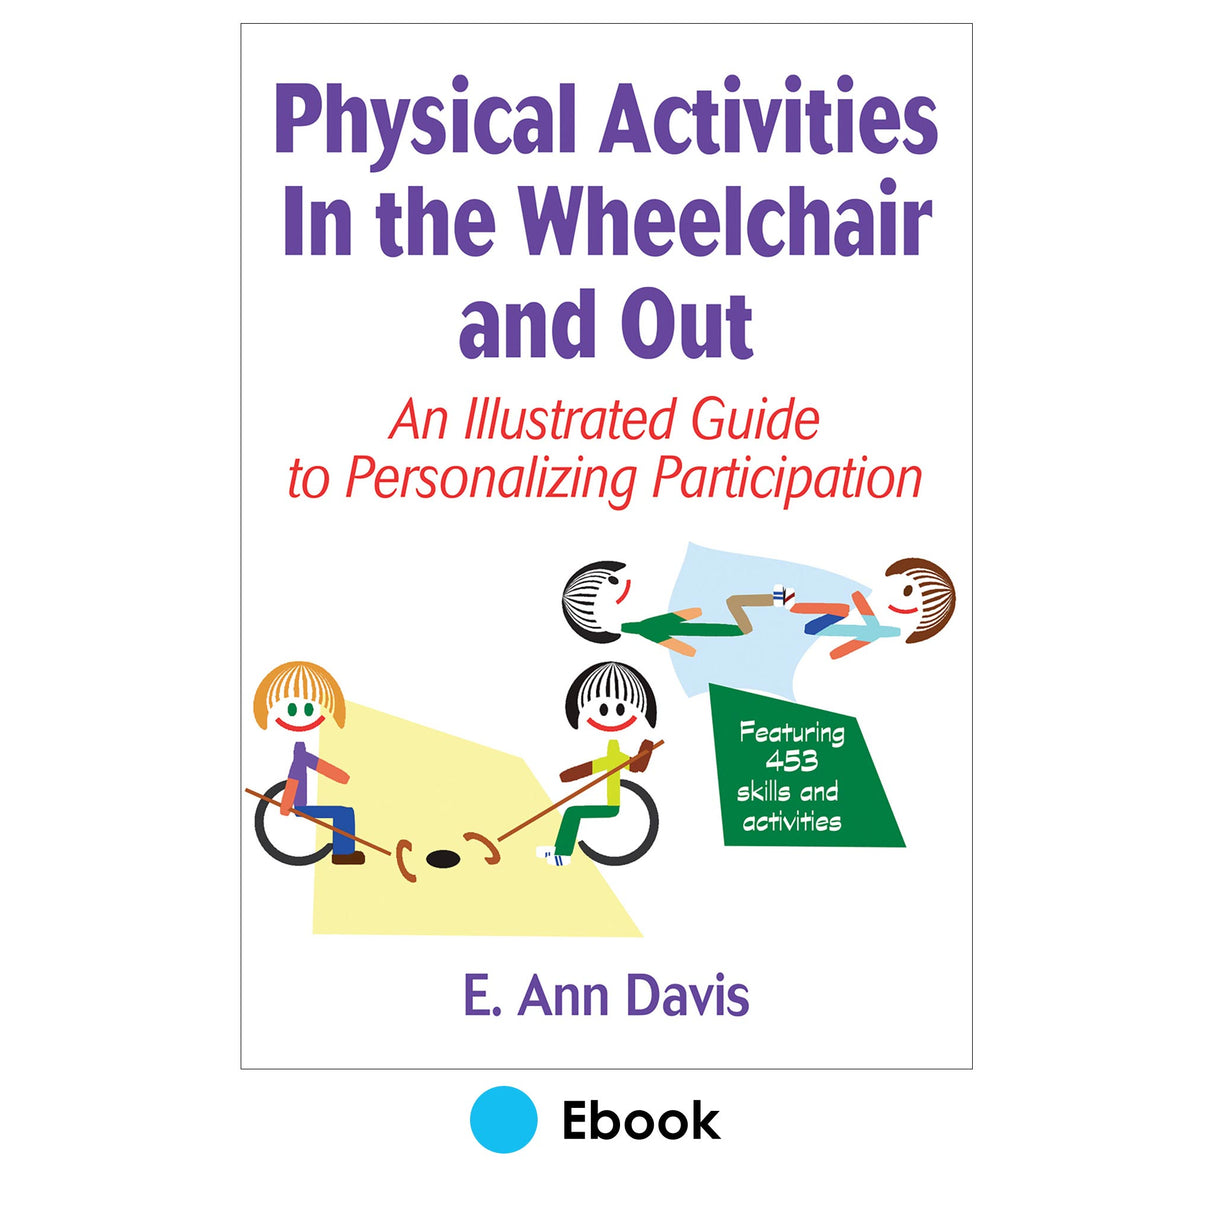 Physical Activities In the Wheelchair and Out PDF